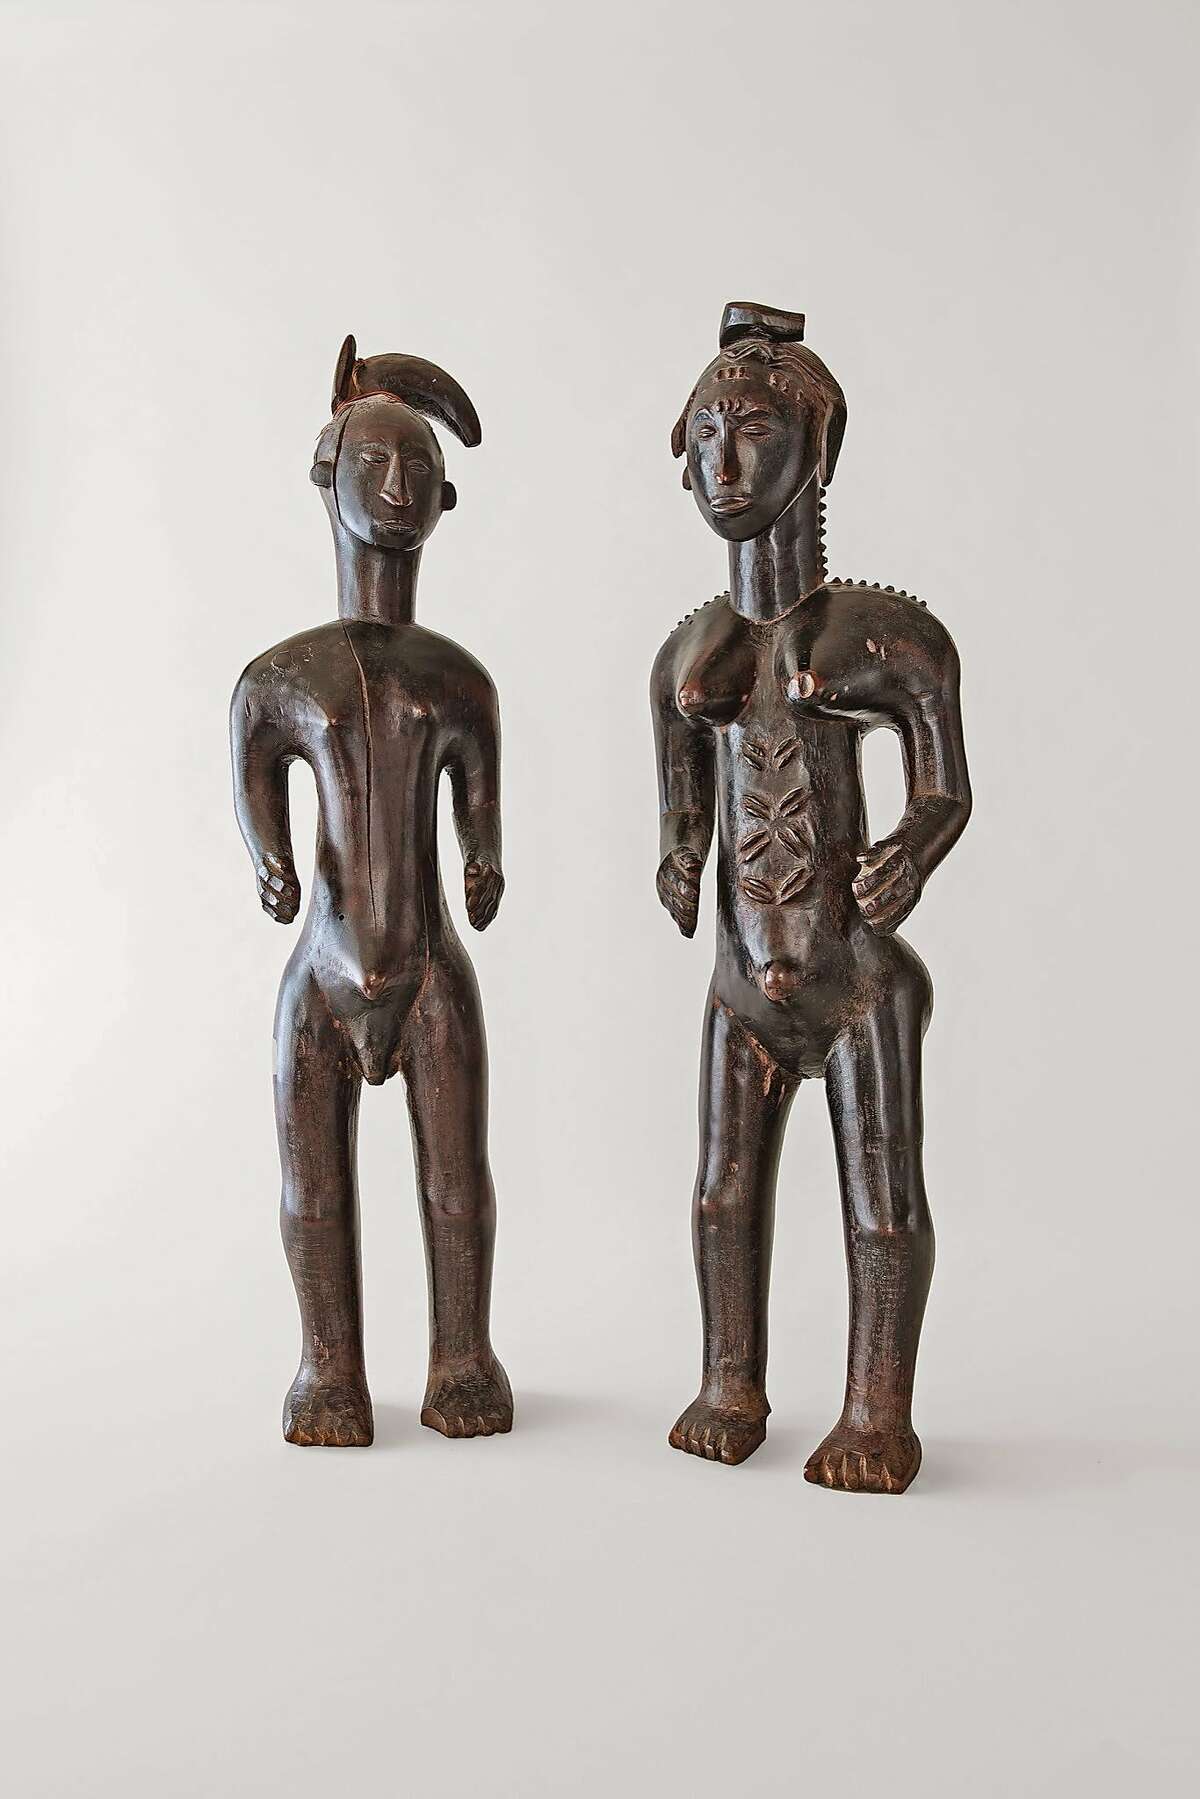 Genentech scientist Richard Scheller has collected African art for nearly 30 years.